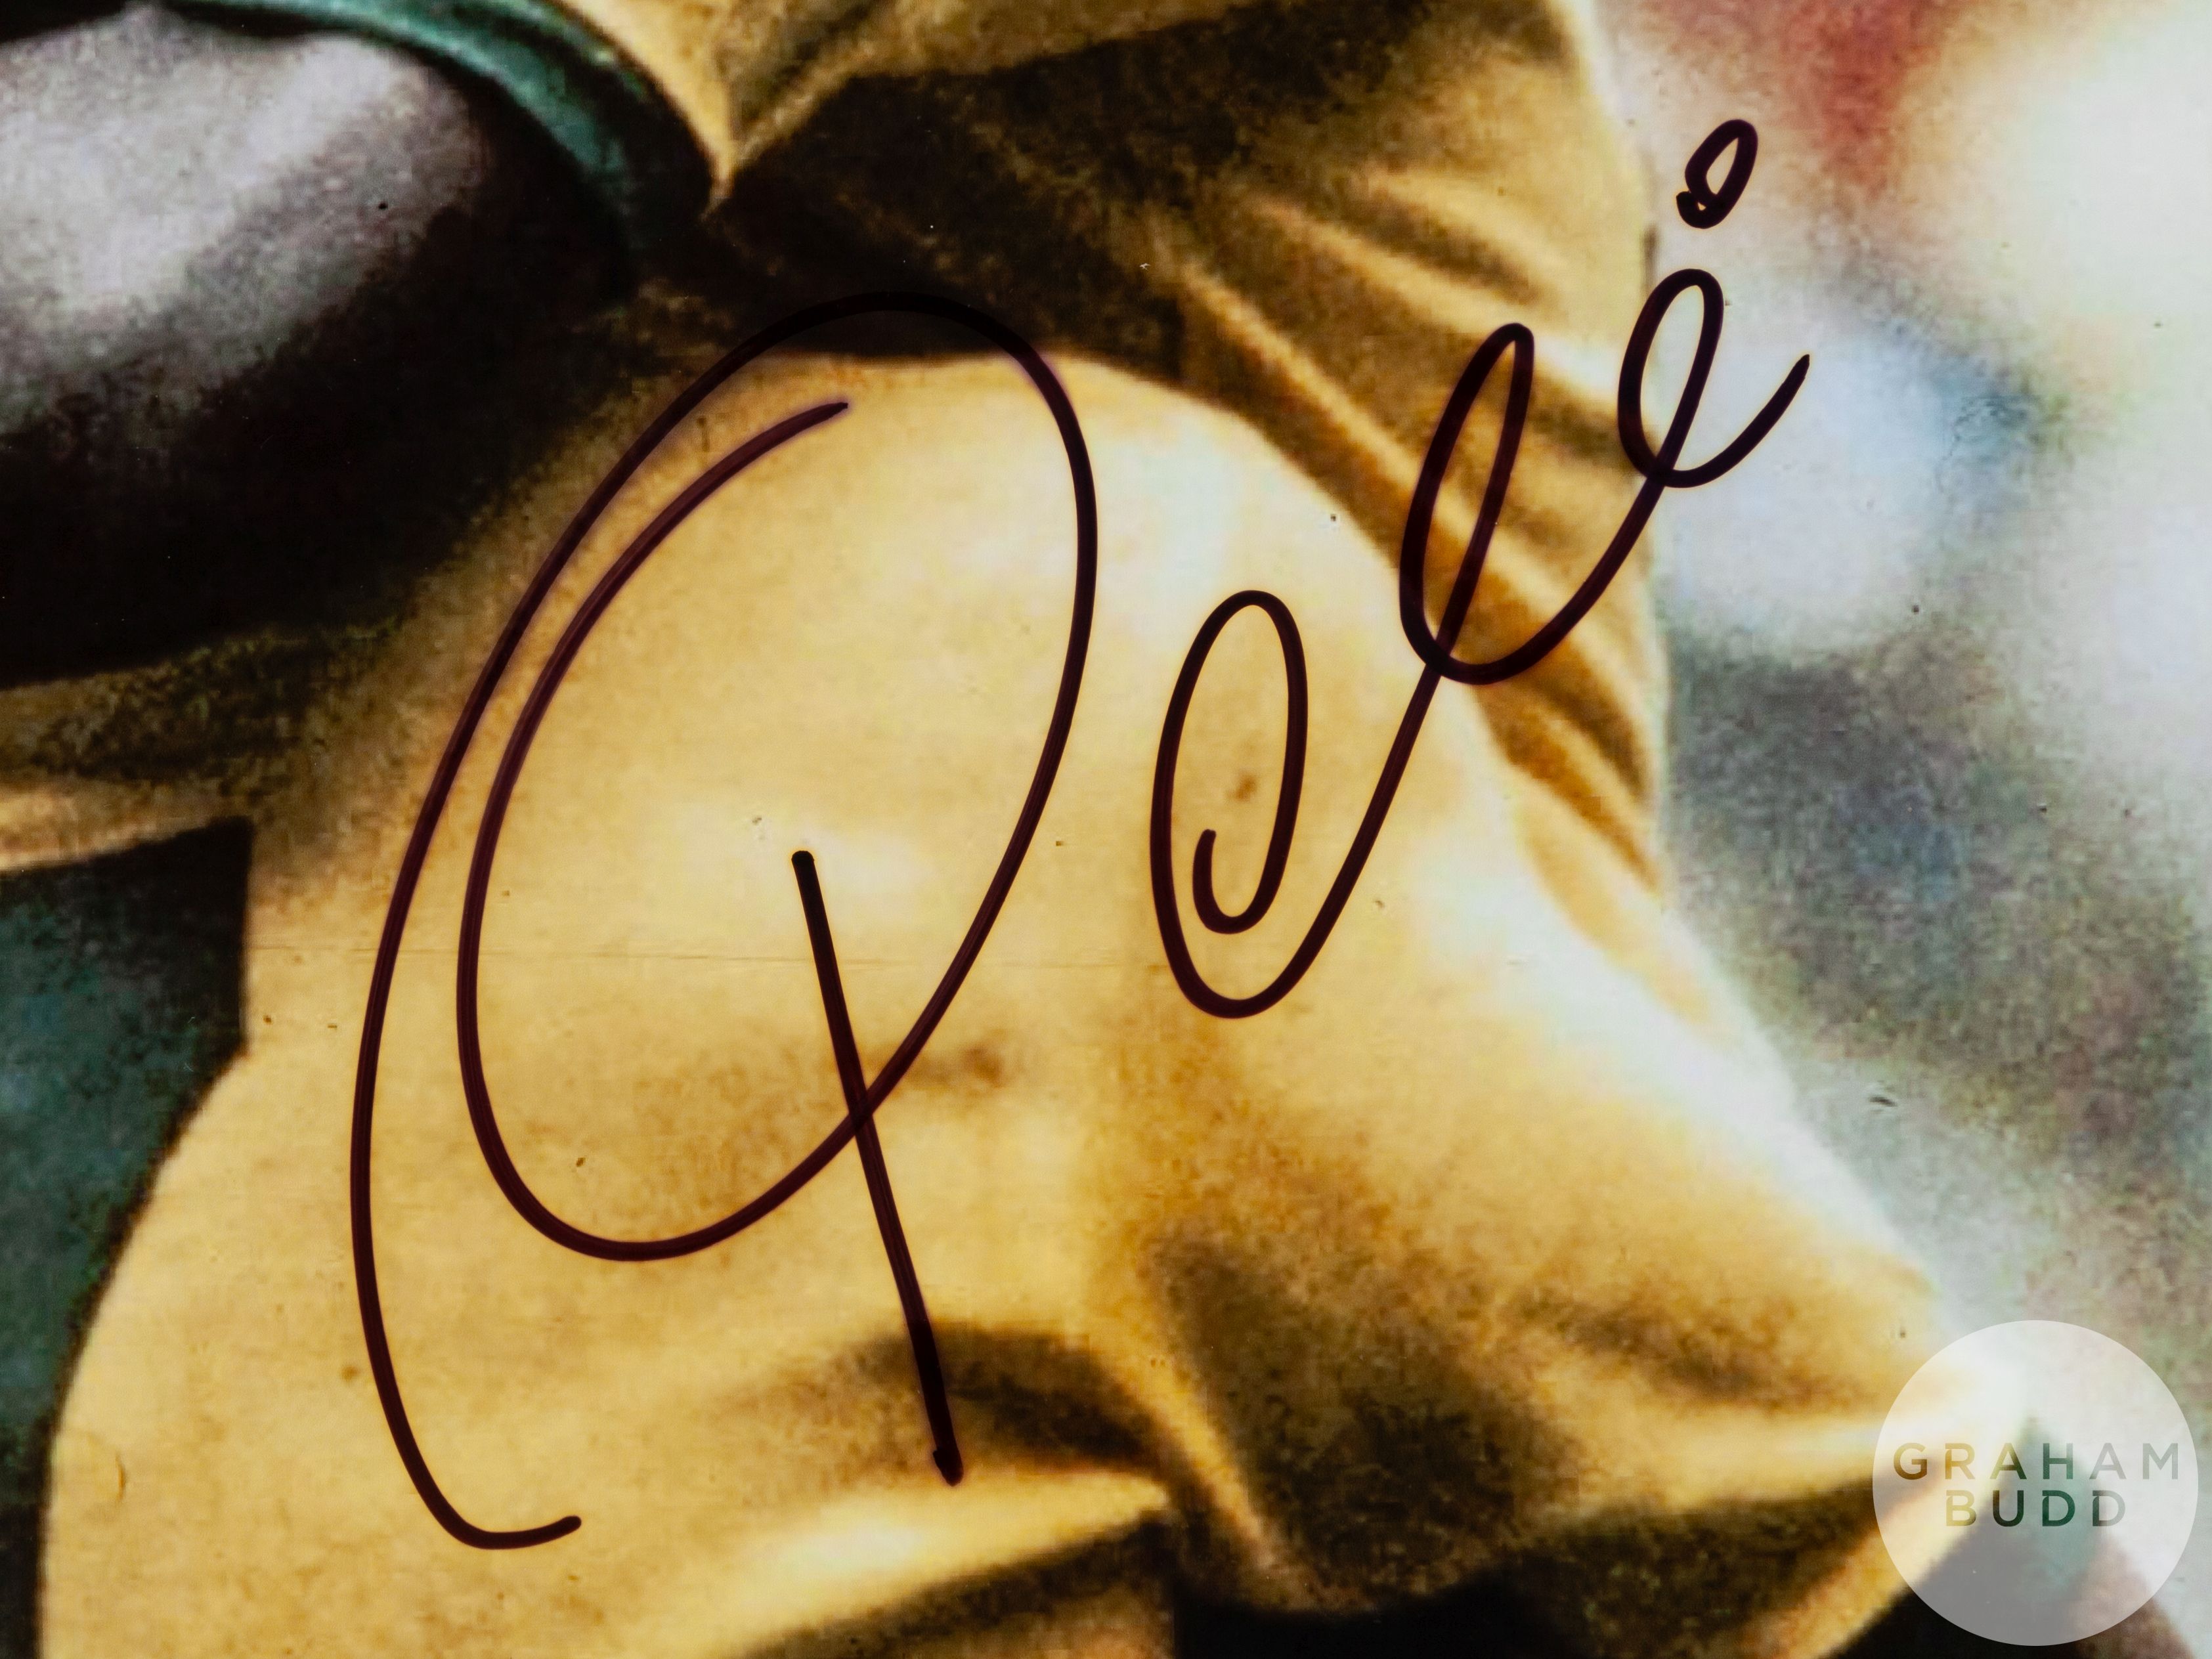 A large colour photographic print of Pele celebrating scoring Brazil's 100th World Cup Goal - Image 2 of 3